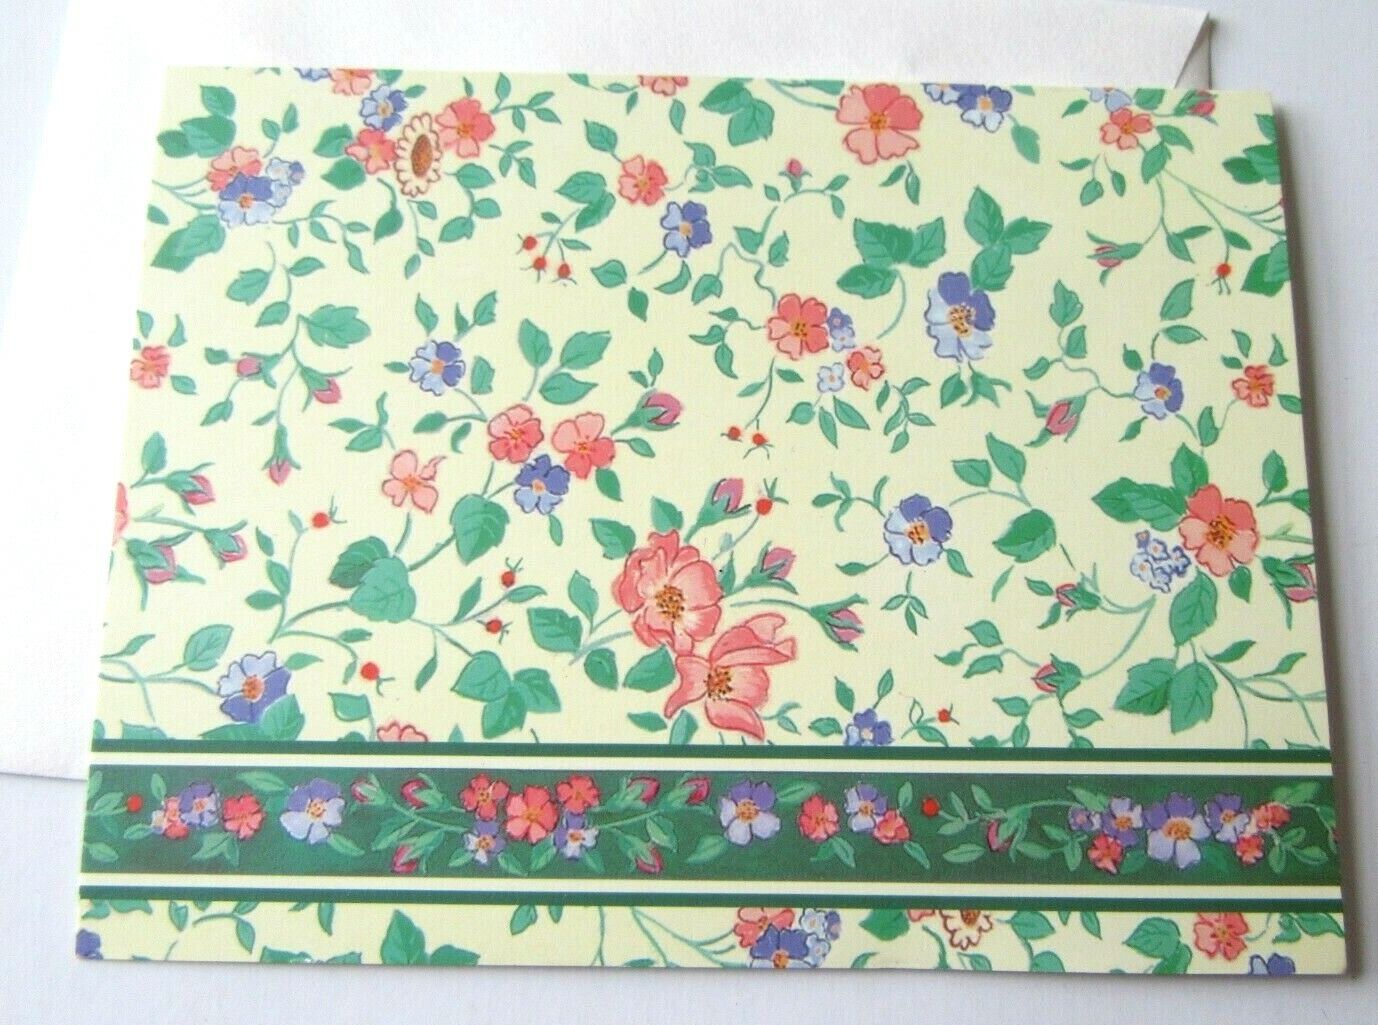 Greeting Card Blank American Greetings Floral on Cream with Green Floral Trim